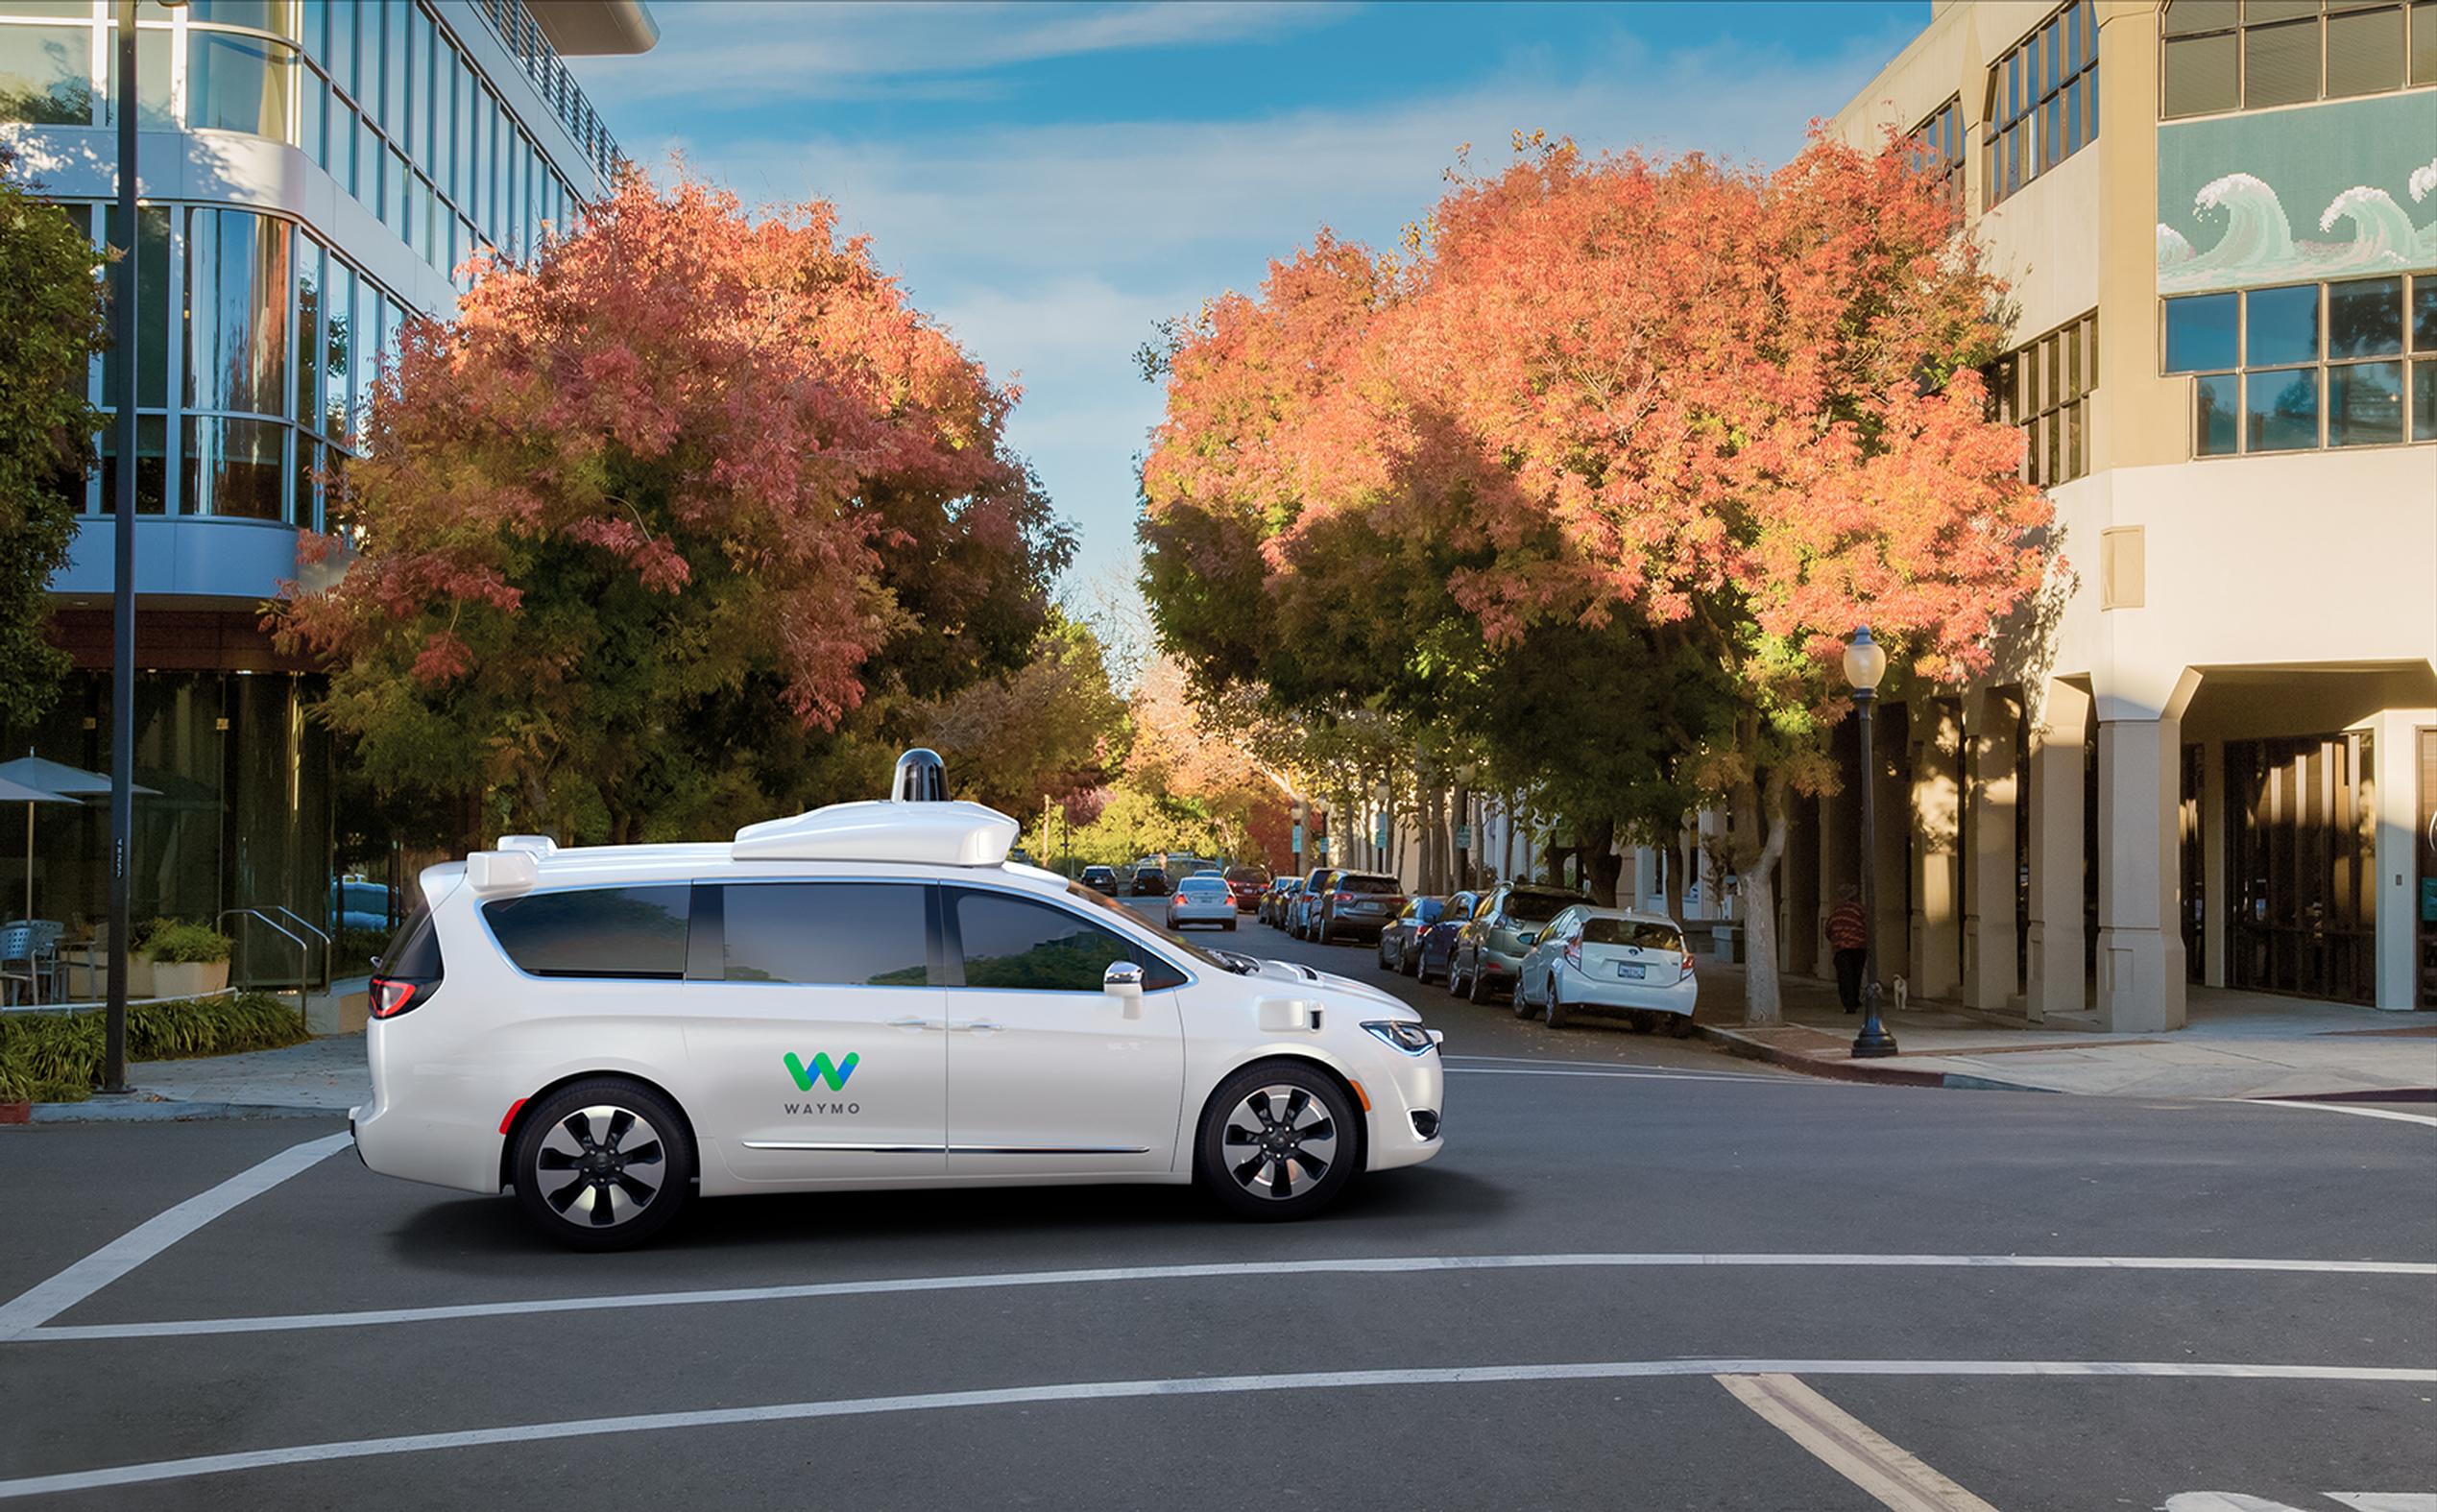 Autonomous vehicles would also offer major opportunities for public health if the vehicles are electric and are used in a ride-sharing format and integrated into a model that also prioritises public transport, cycling and walking